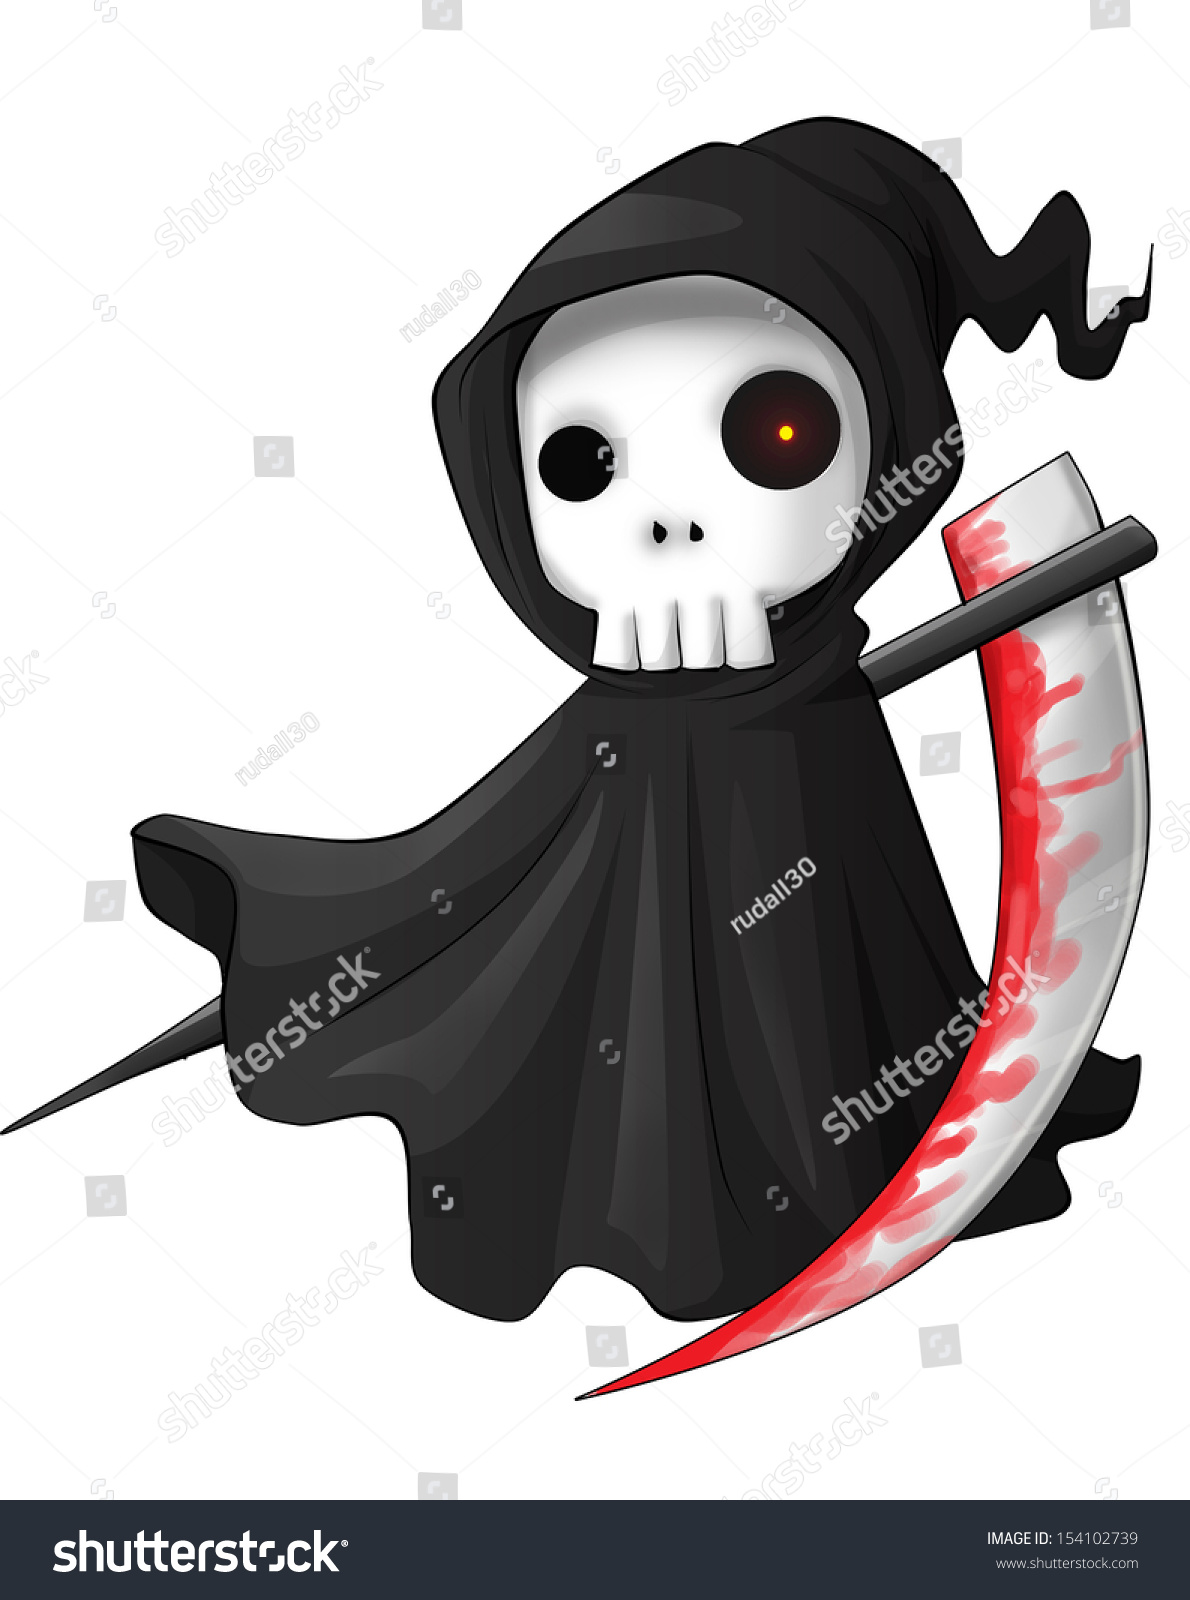 Cute Cartoon Grim Reaper With Scythe Isolated On White